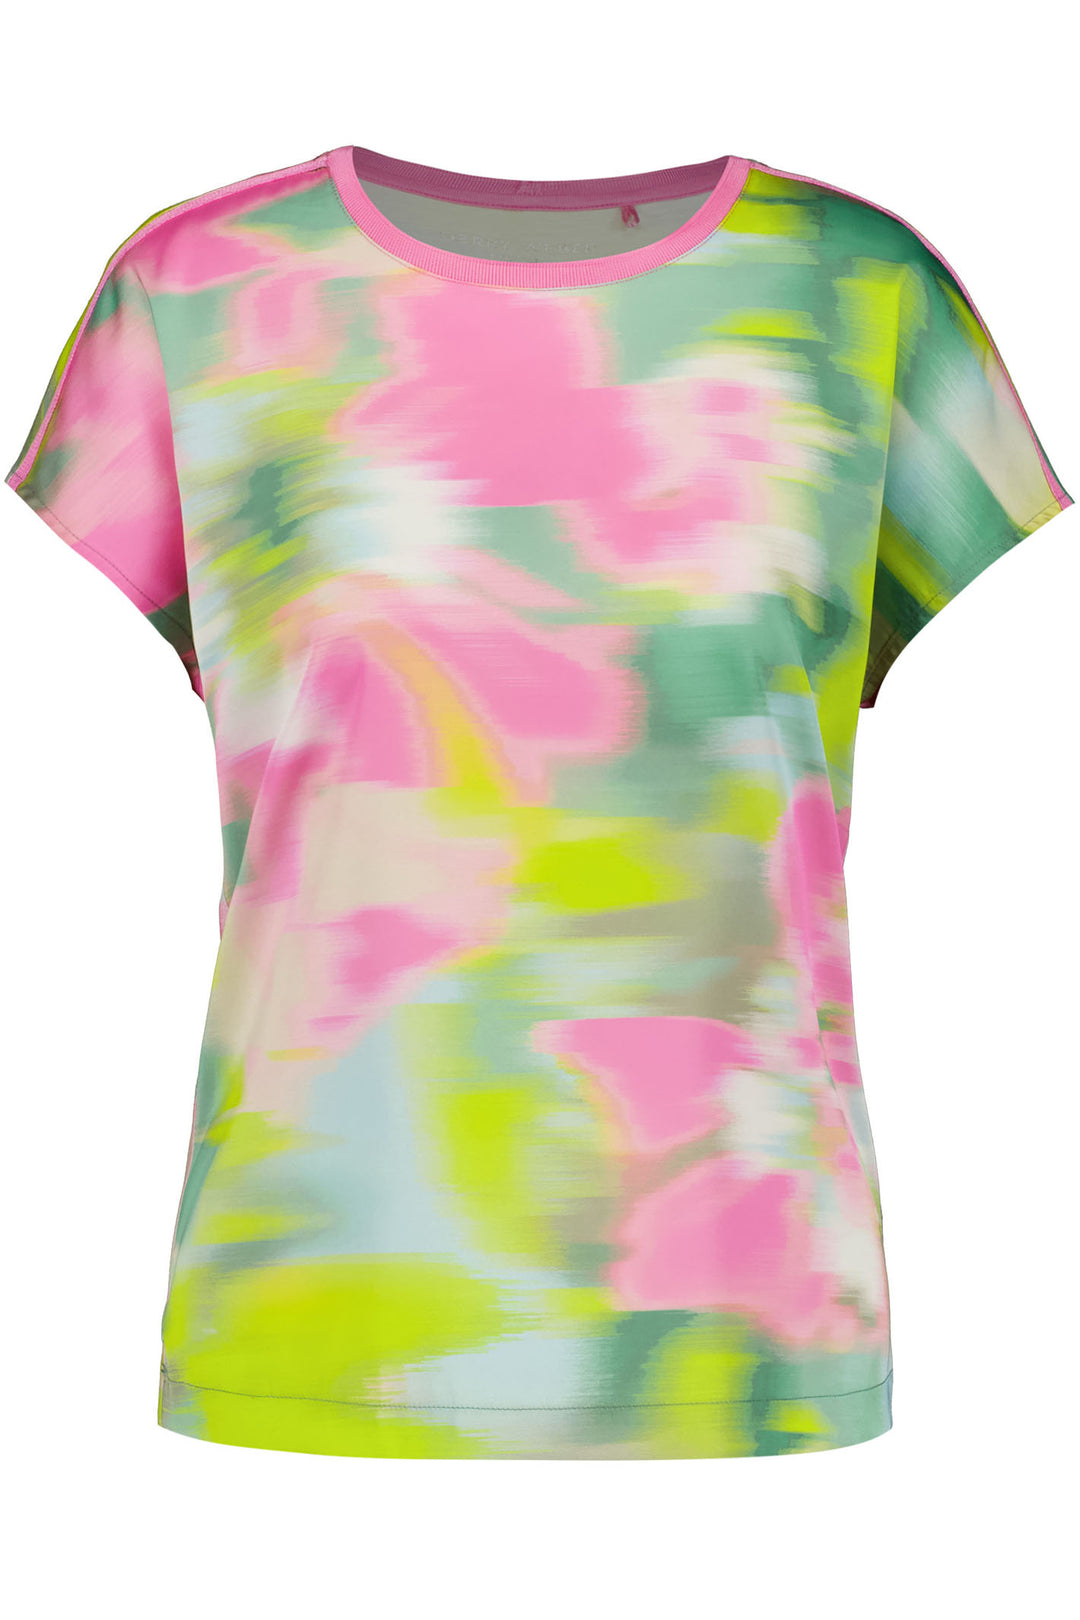 Gerry Weber 270037 Pink Watercolour Print EcoVero Top - Experience Boutique